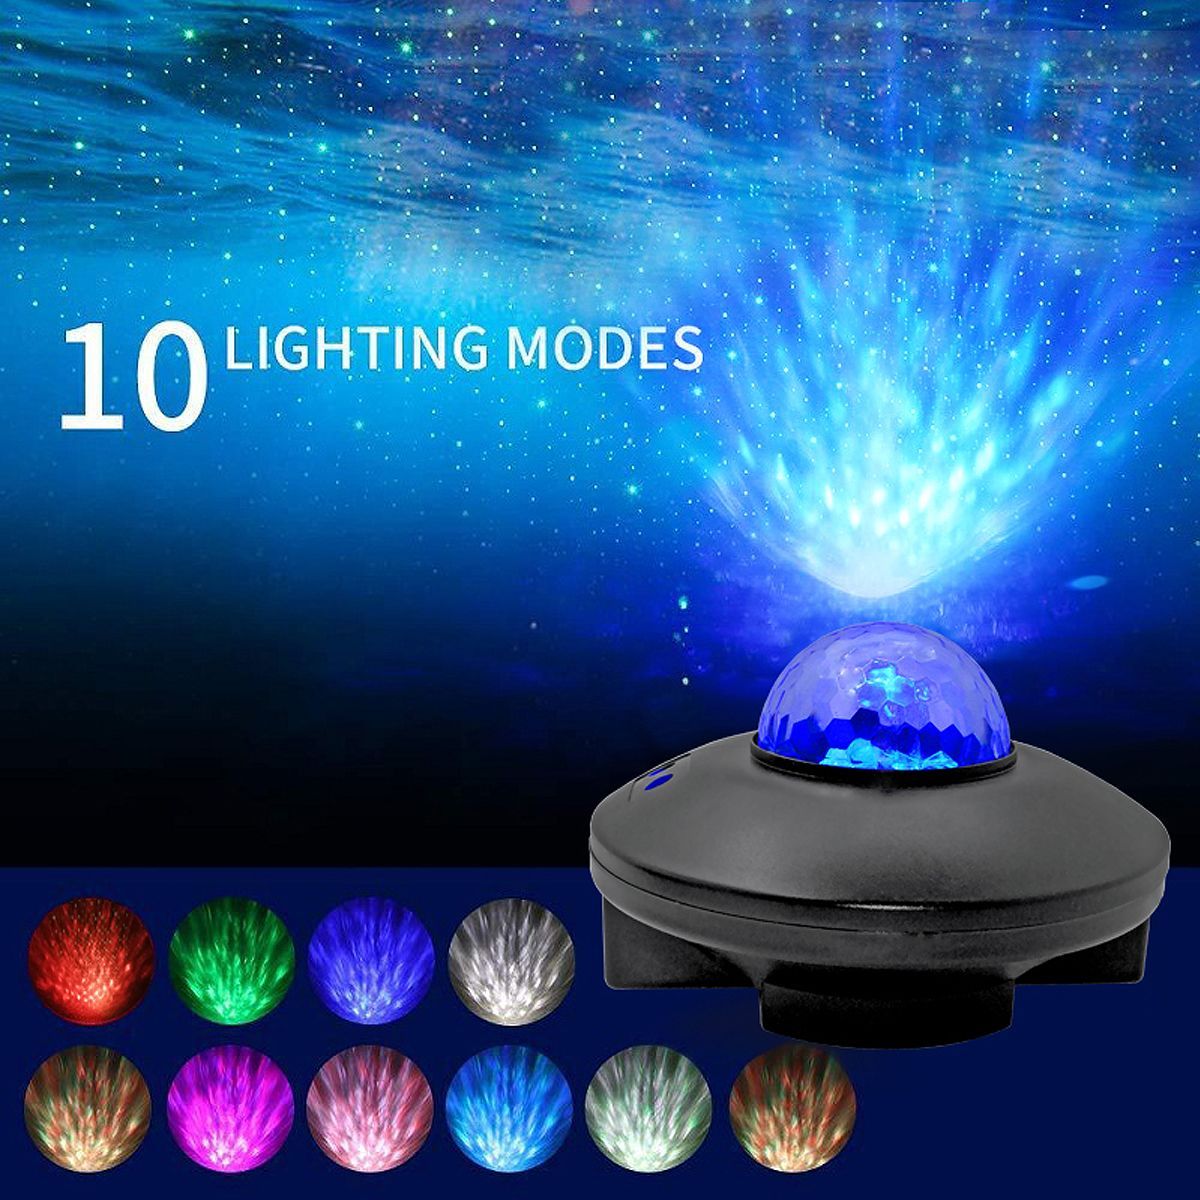 USB-LED-Laser-Projector-bluetooth-Speaker-Lamp-Galaxy-Starry-Night-Light-Christmas-Party-Lights-Gift-1753804